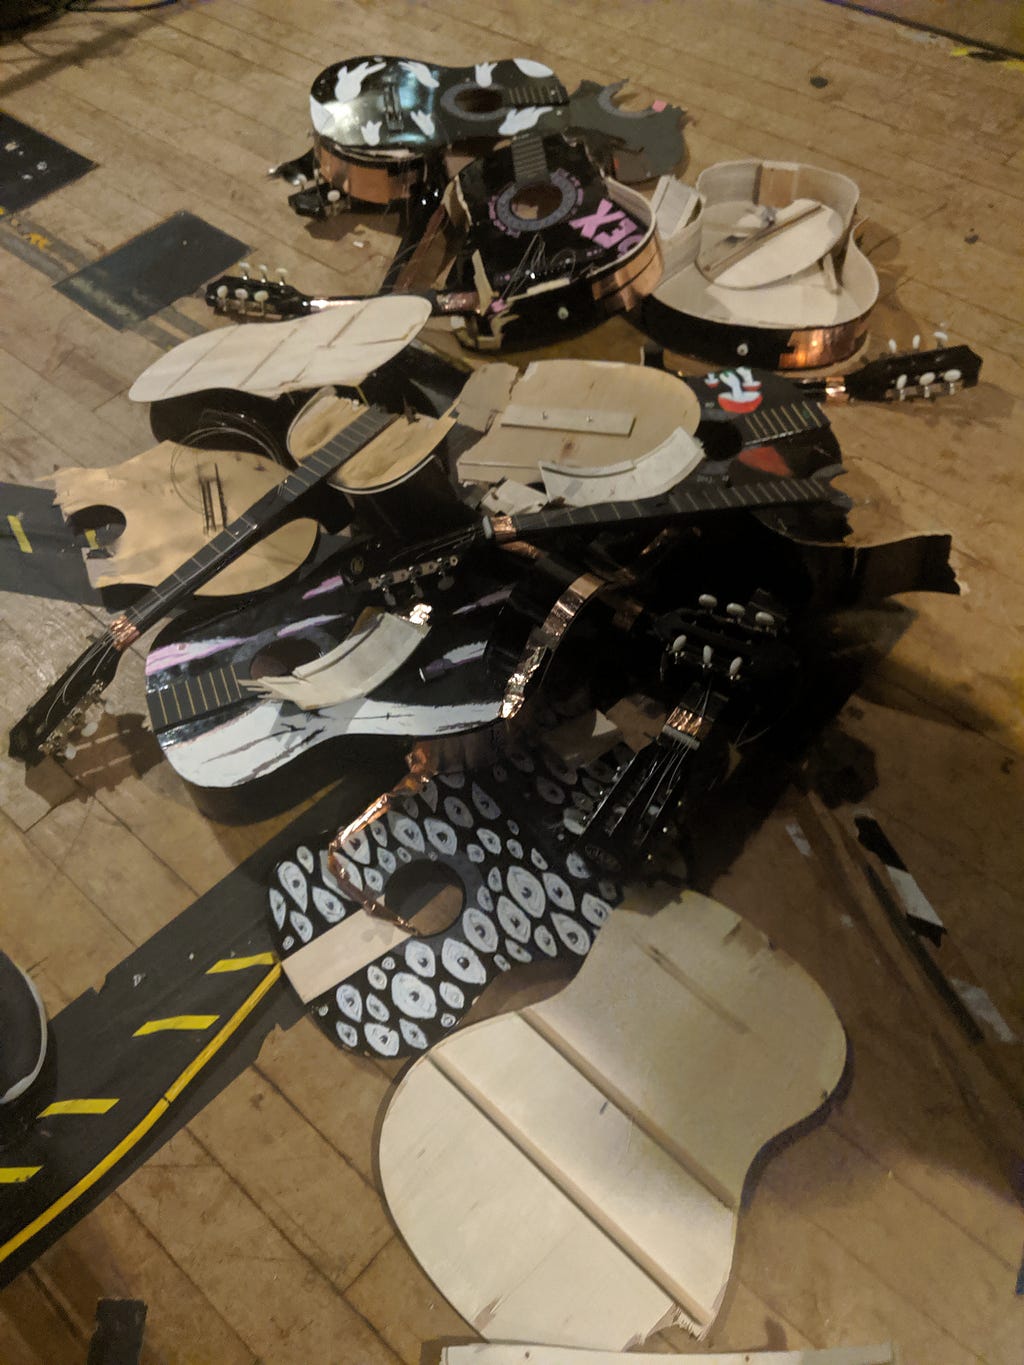 a pile of smashed guitars, their face plates battered.